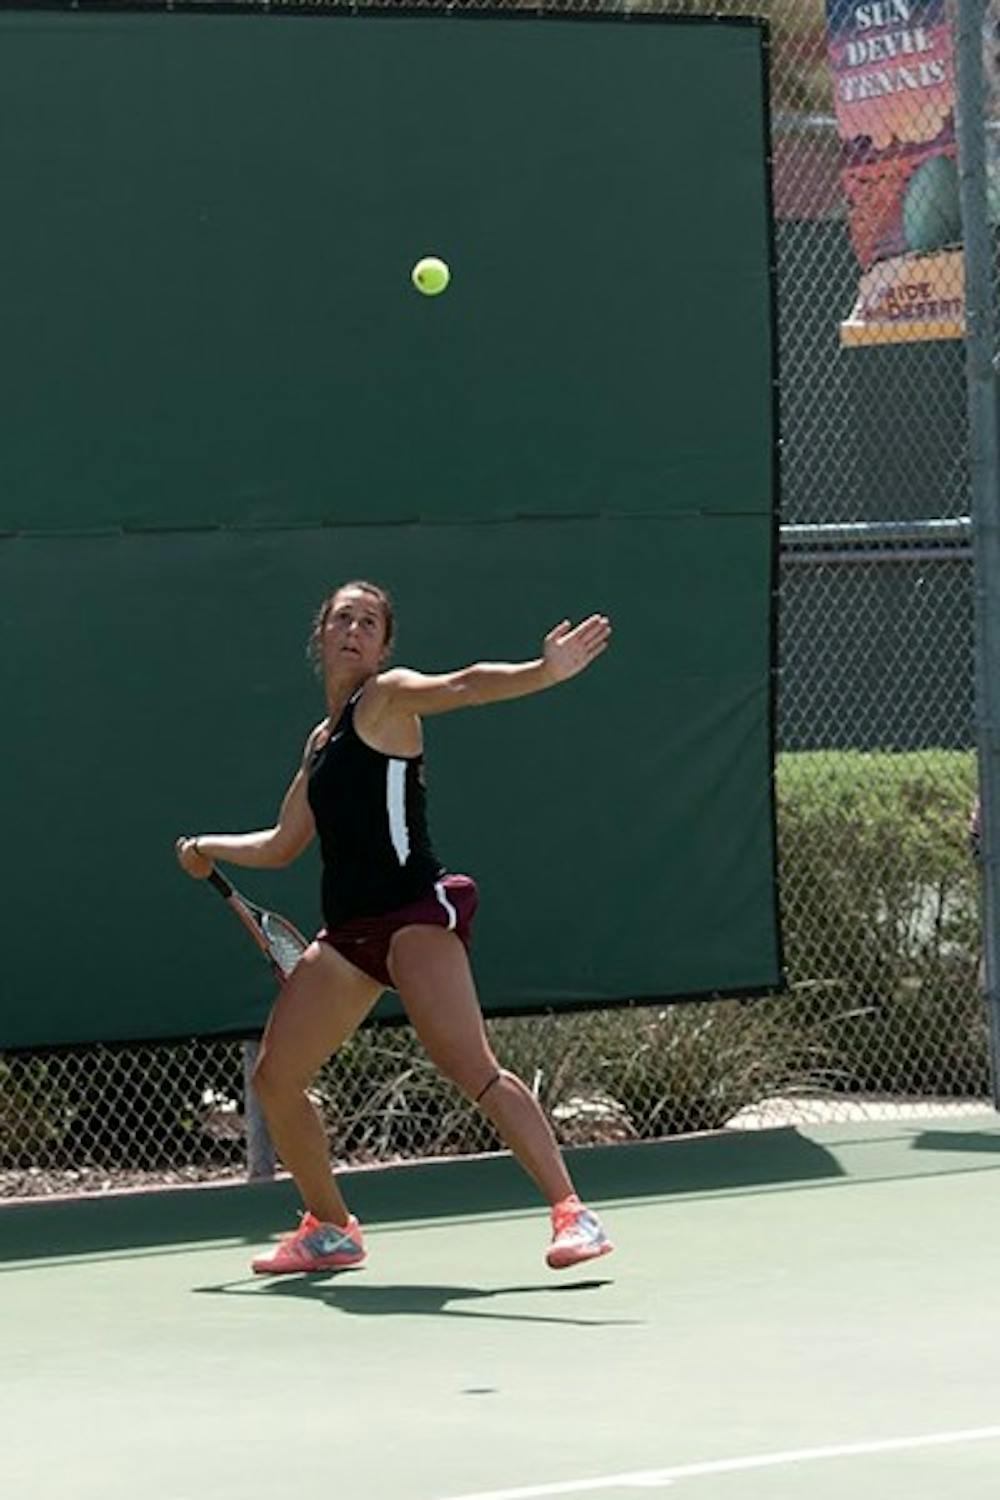 Sophomore Stephanie Vlad attempts to return the ball in a match against Colorado on April 4. Vlad defeated Julyette Steur of Colorado 6-3, 6-1. (Photo by Mario Mendez)